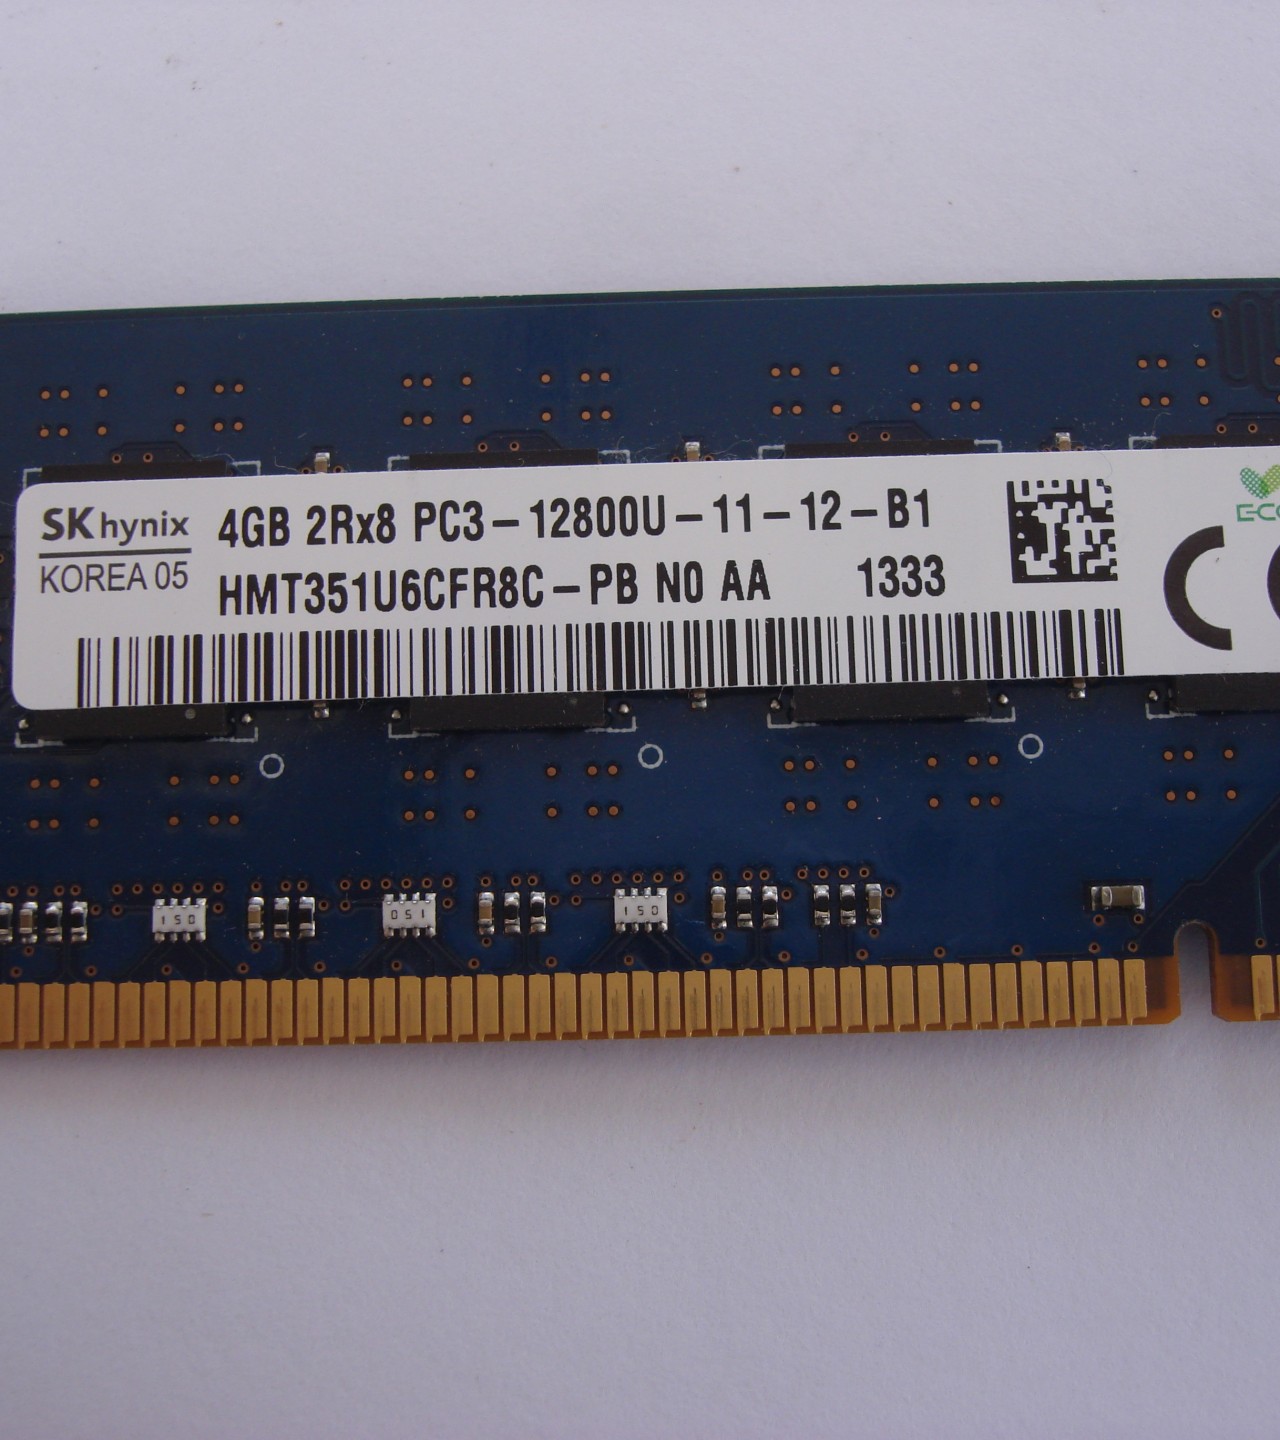 4gb DDR3 12800 bus Ram for PC